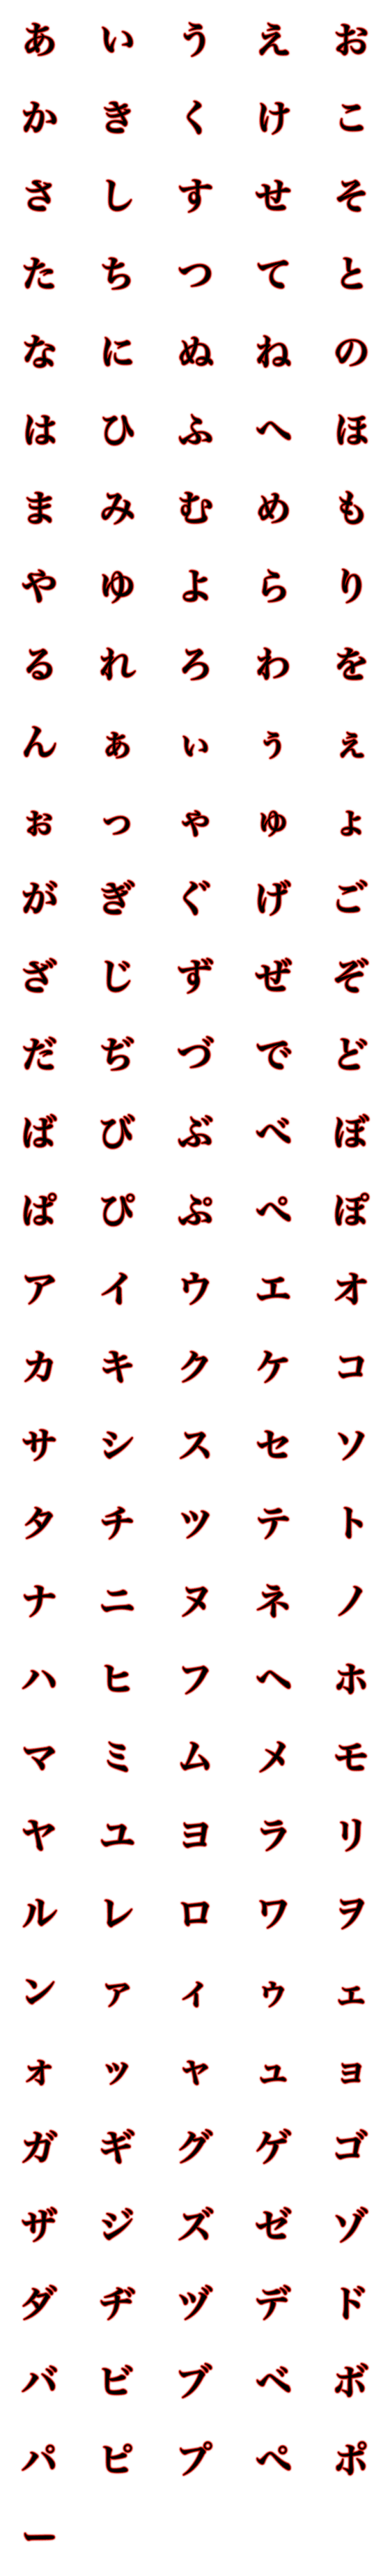 [LINE絵文字]ホラー文字(カナかな)の画像一覧